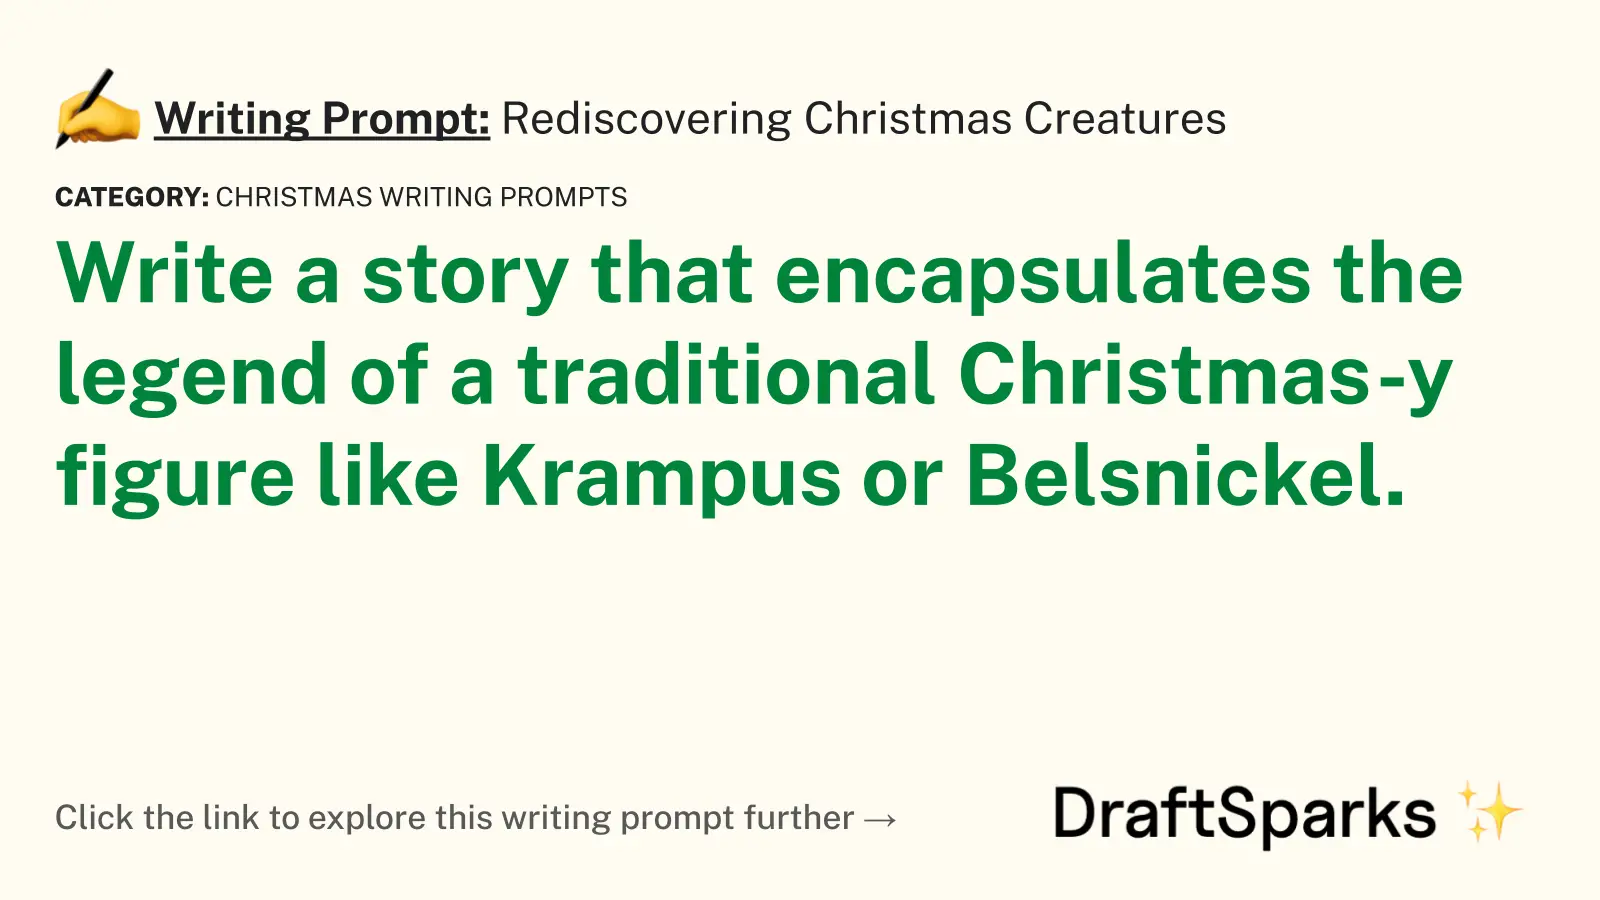 Rediscovering Christmas Creatures